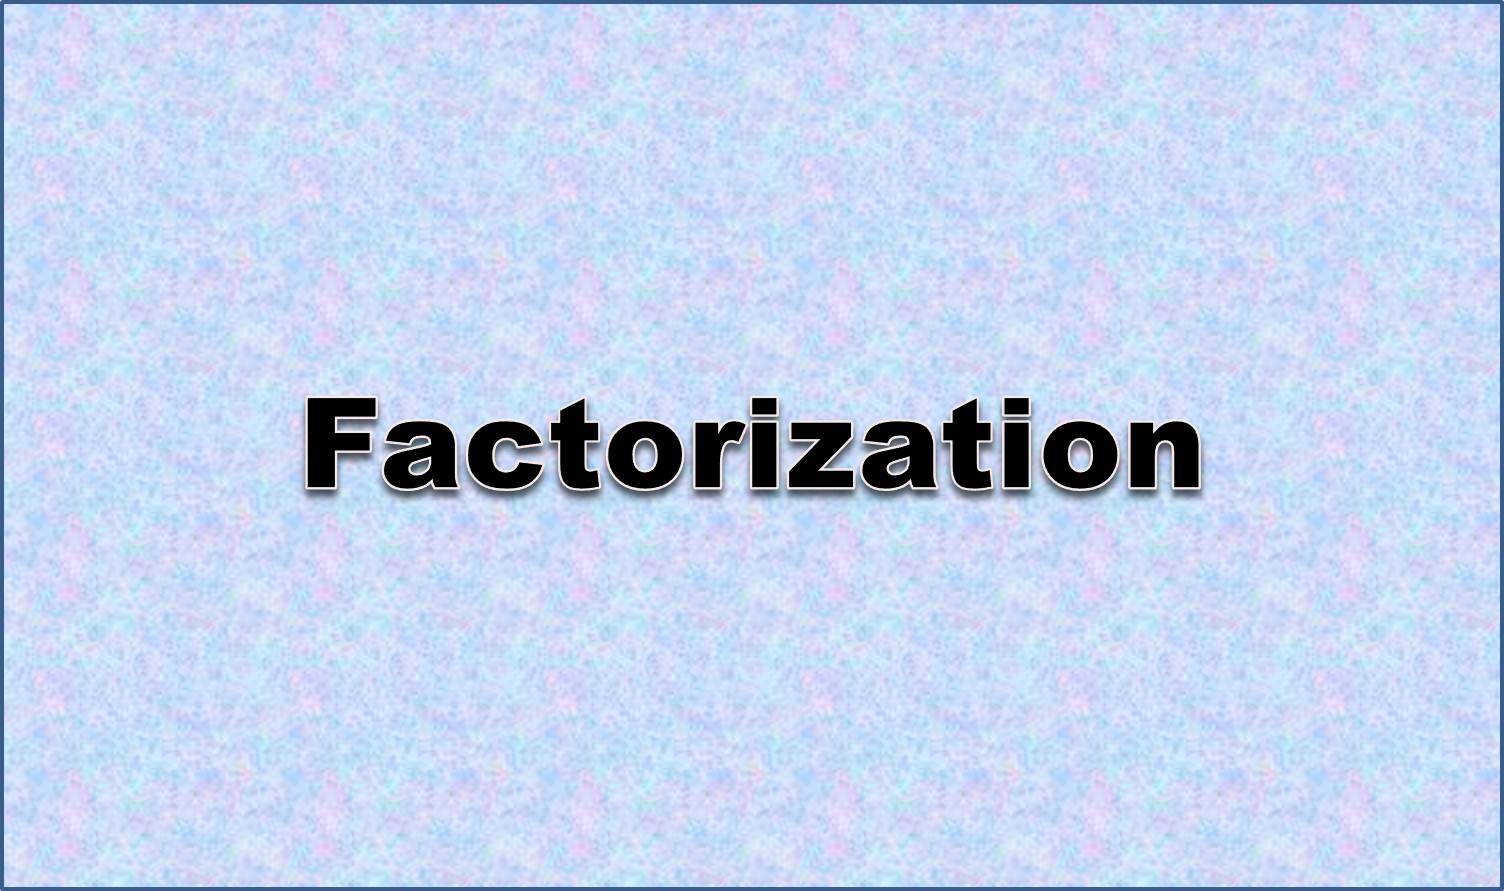 http://study.aisectonline.com/images/Factoring polynomials-common factor.jpg